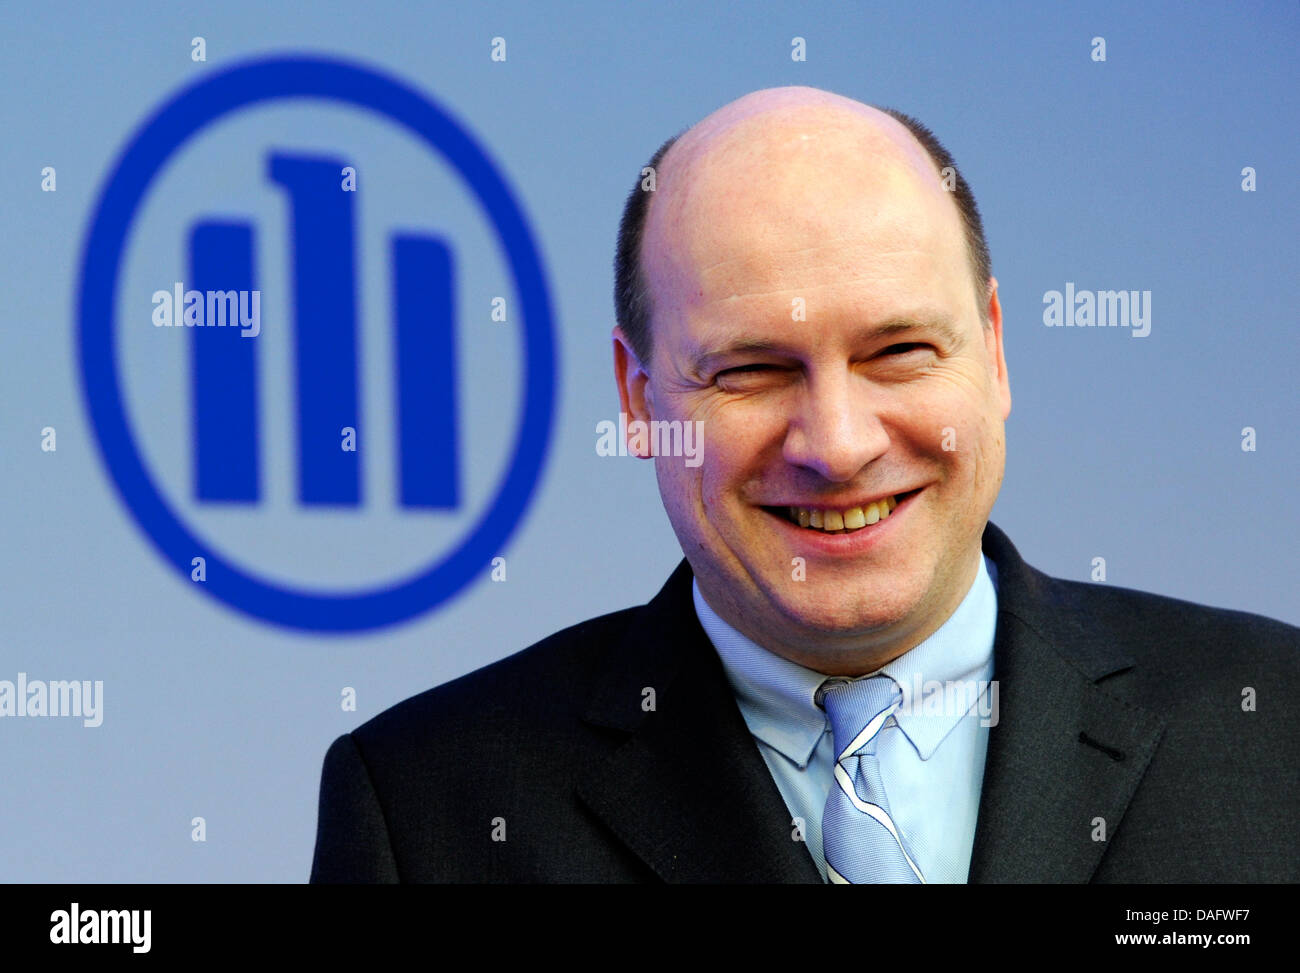 CEO of Allianz Germany, Dr. Markus Riess, is pictured at the annual press